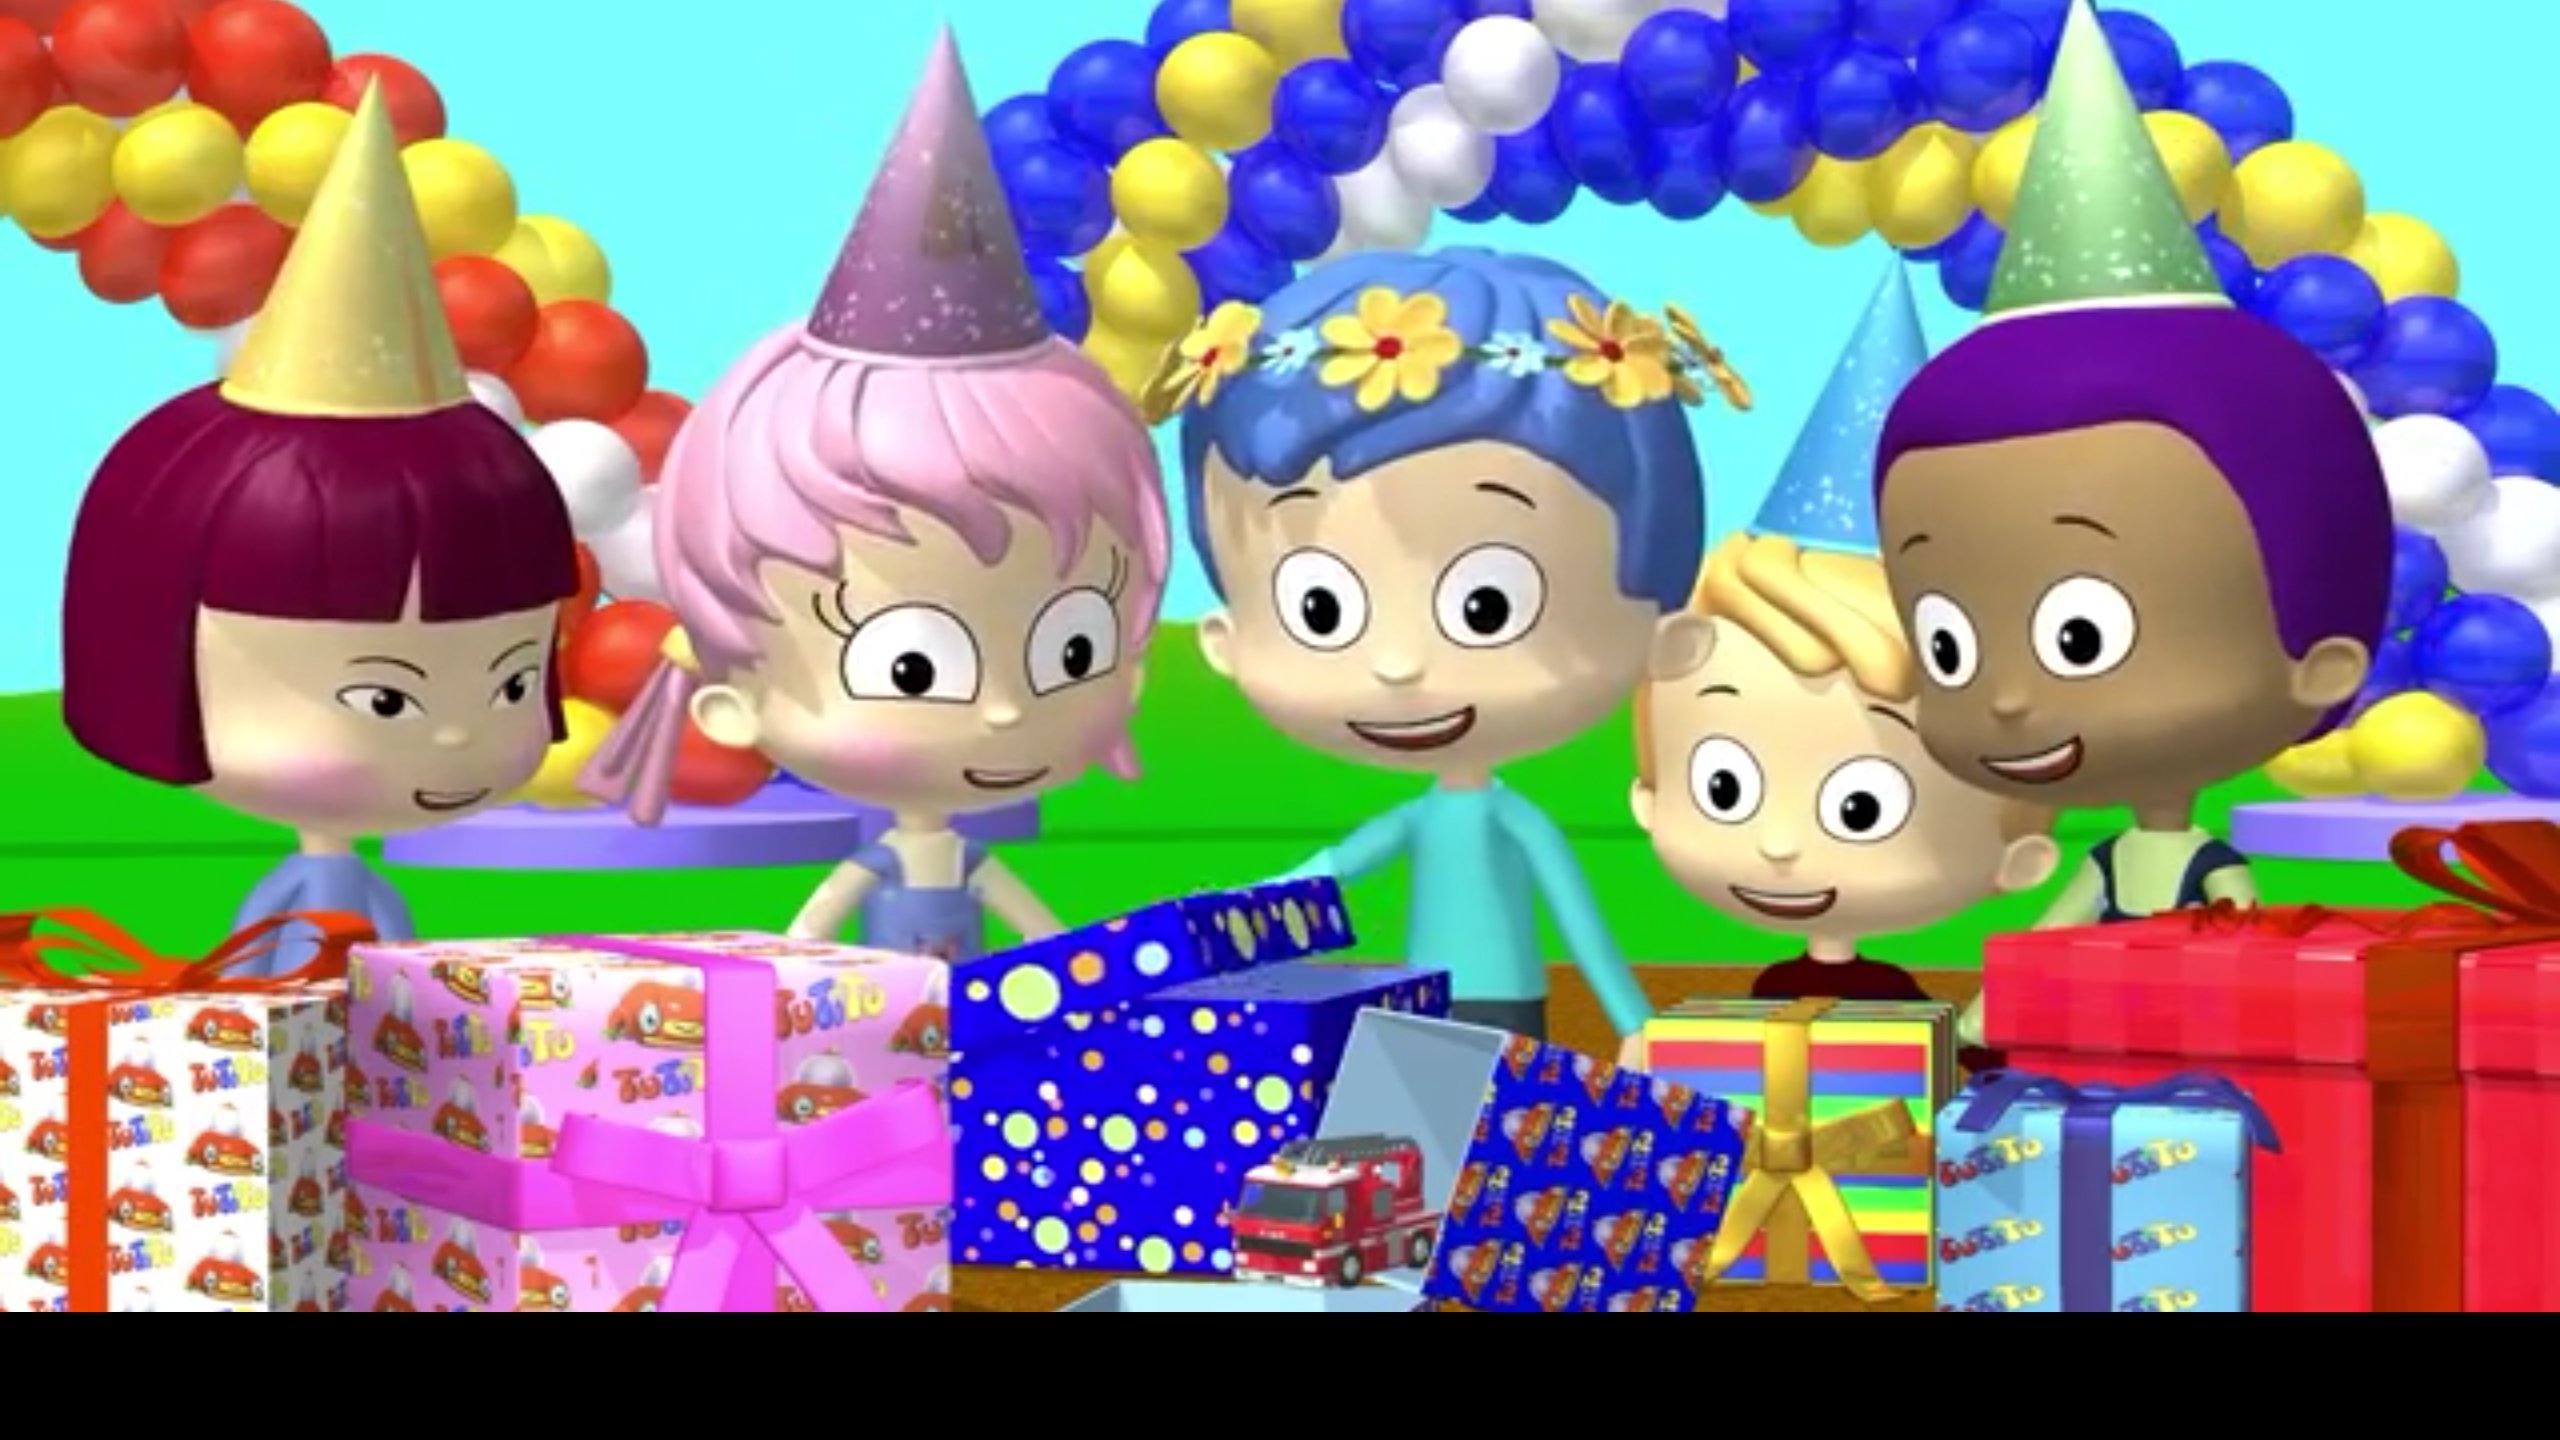 Happy Birthday Song APK download - Happy Birthday Song for Android Free